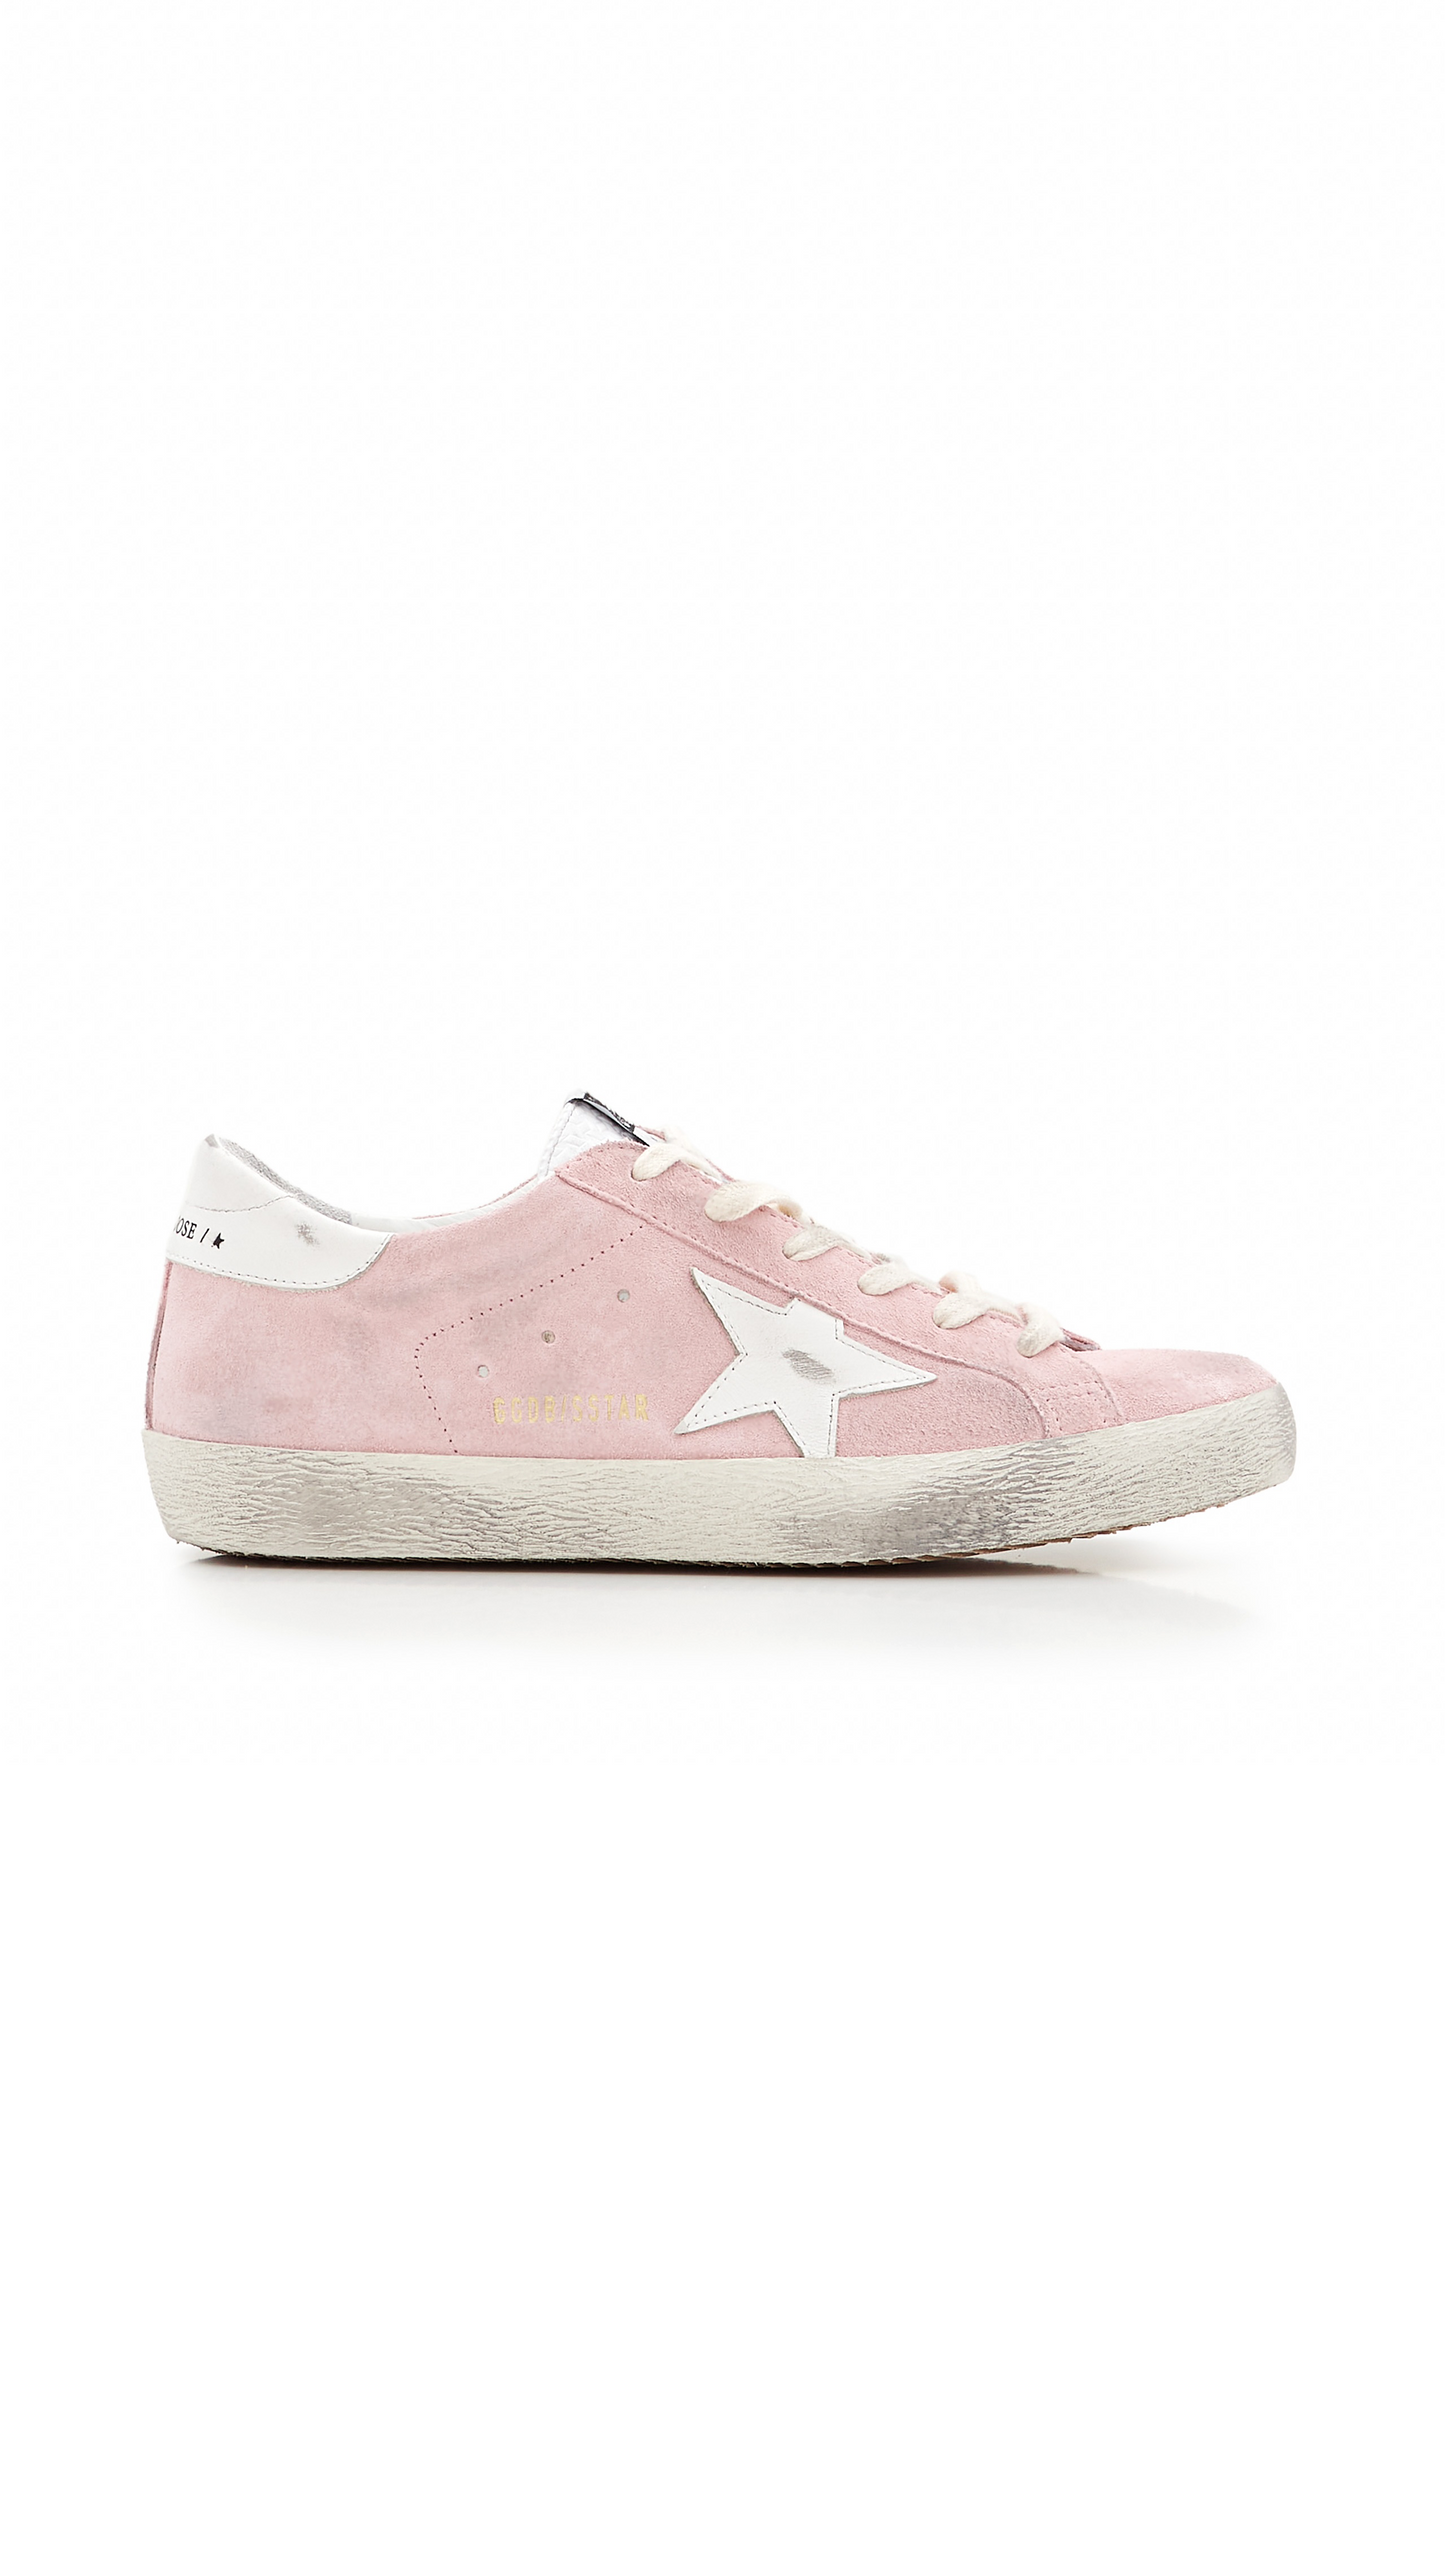 Superstar Sneakers - Pink / White